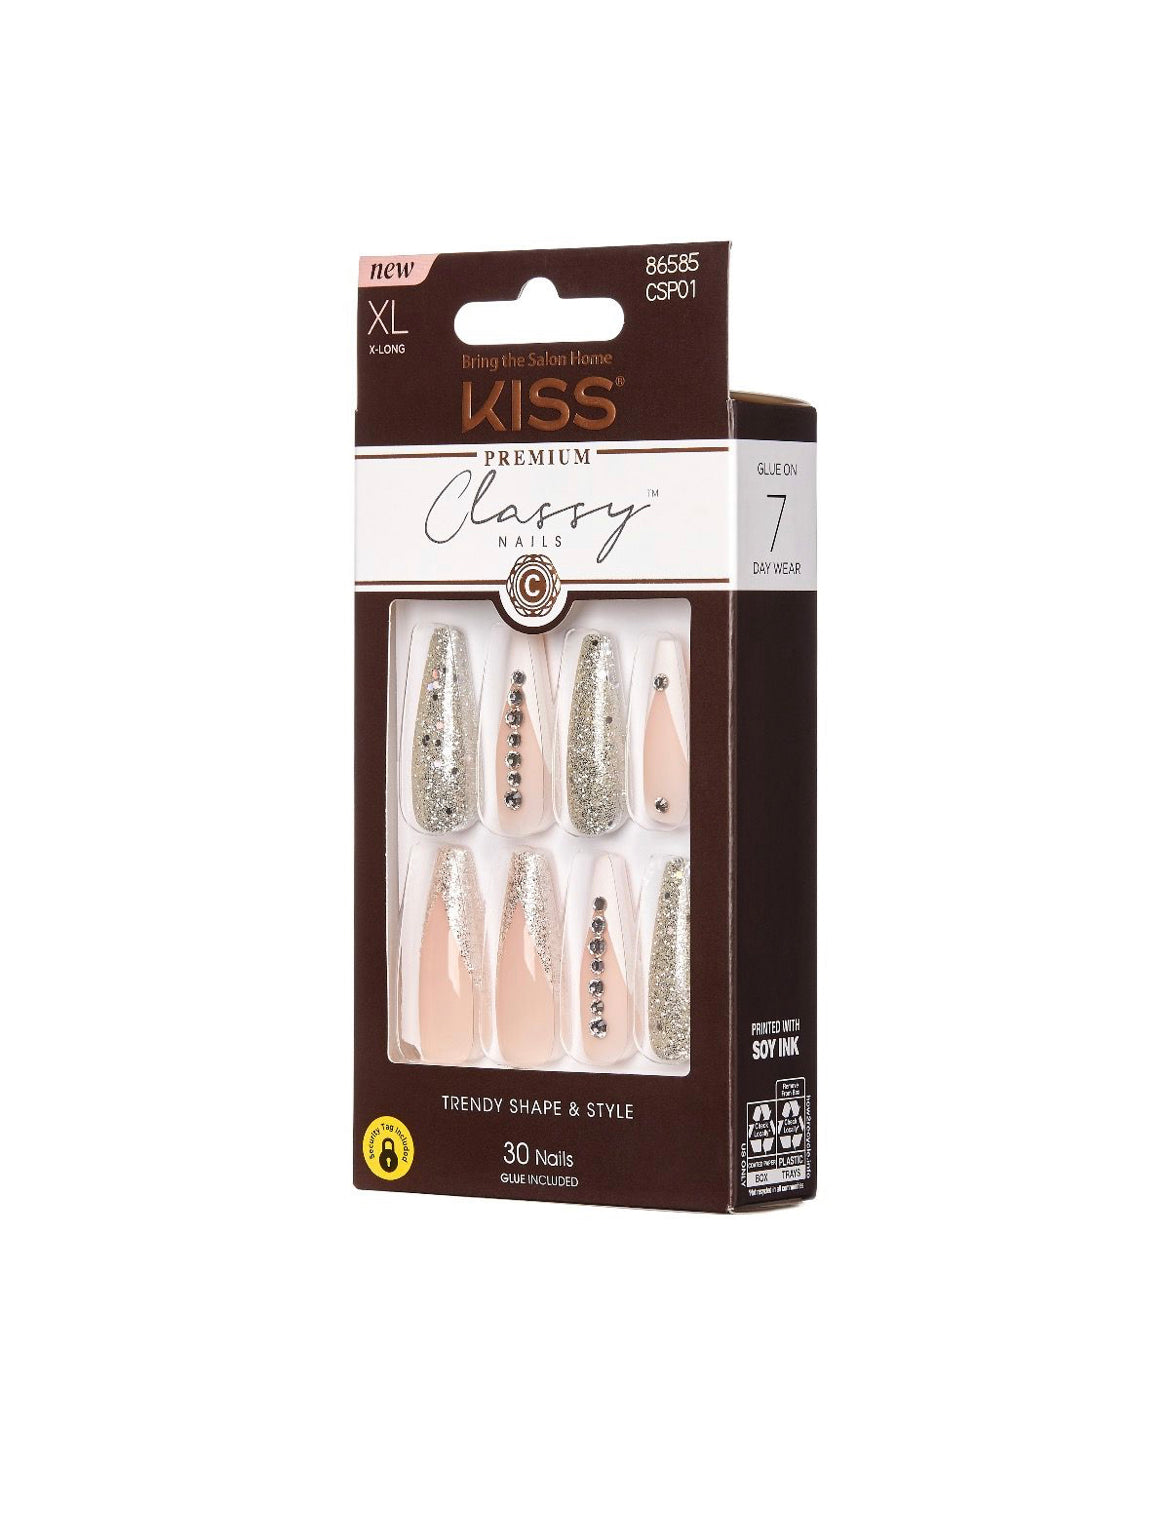 KISS | PREMIUM CLASSY NAILS- SOPHISTICATED